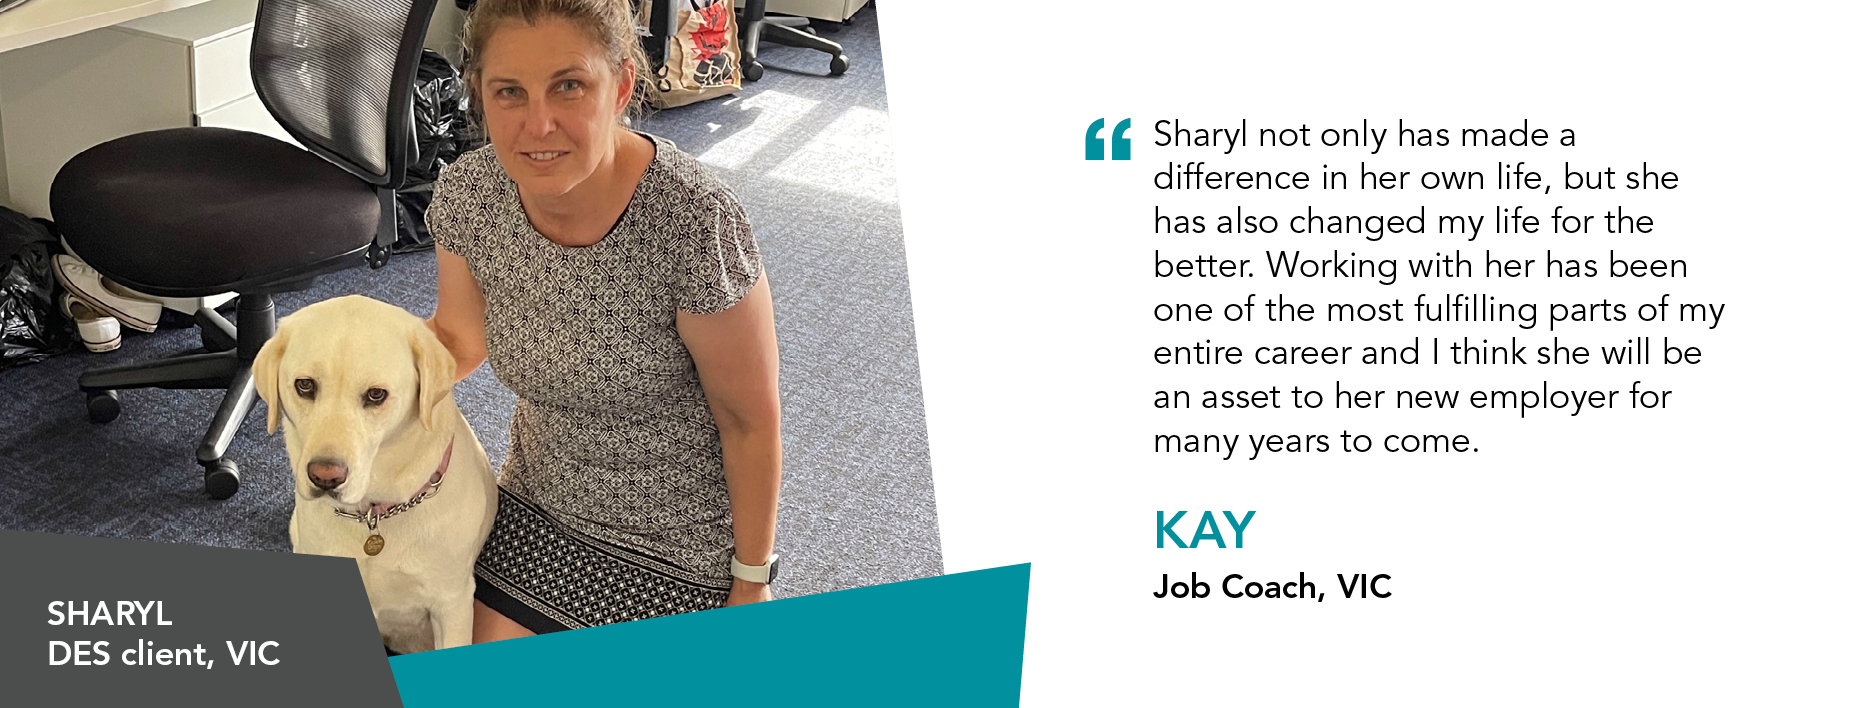 "Sharyl not only has made a difference in her own life, but she has also changed my life for the better. Working with her has been one of the most fulfilling parts of my entire career and I think she will be an asset to her new employer for many years to come." Kay Job Coach Victoria